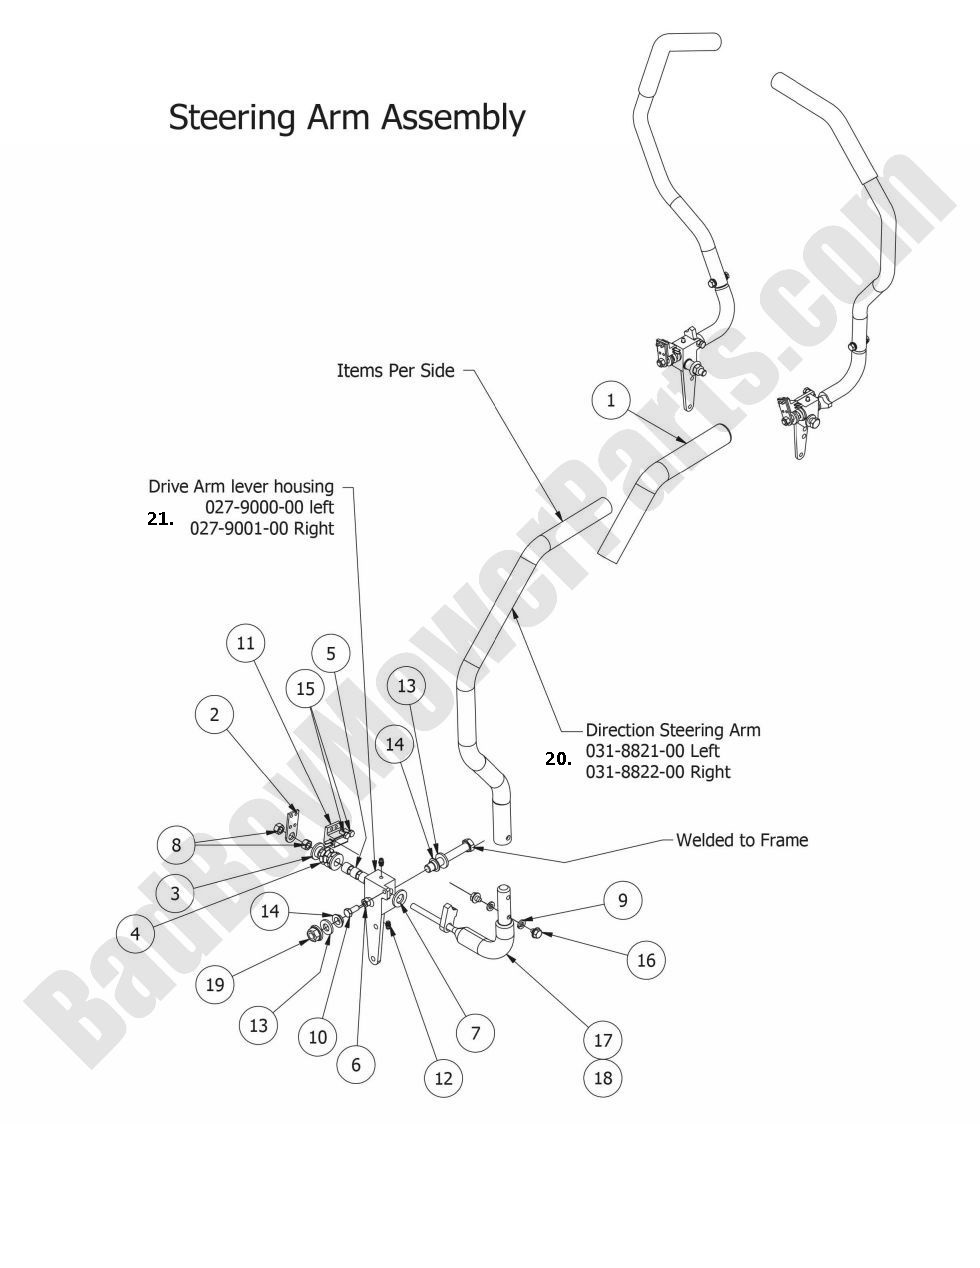 2015 MZ Steering Arm Assembly